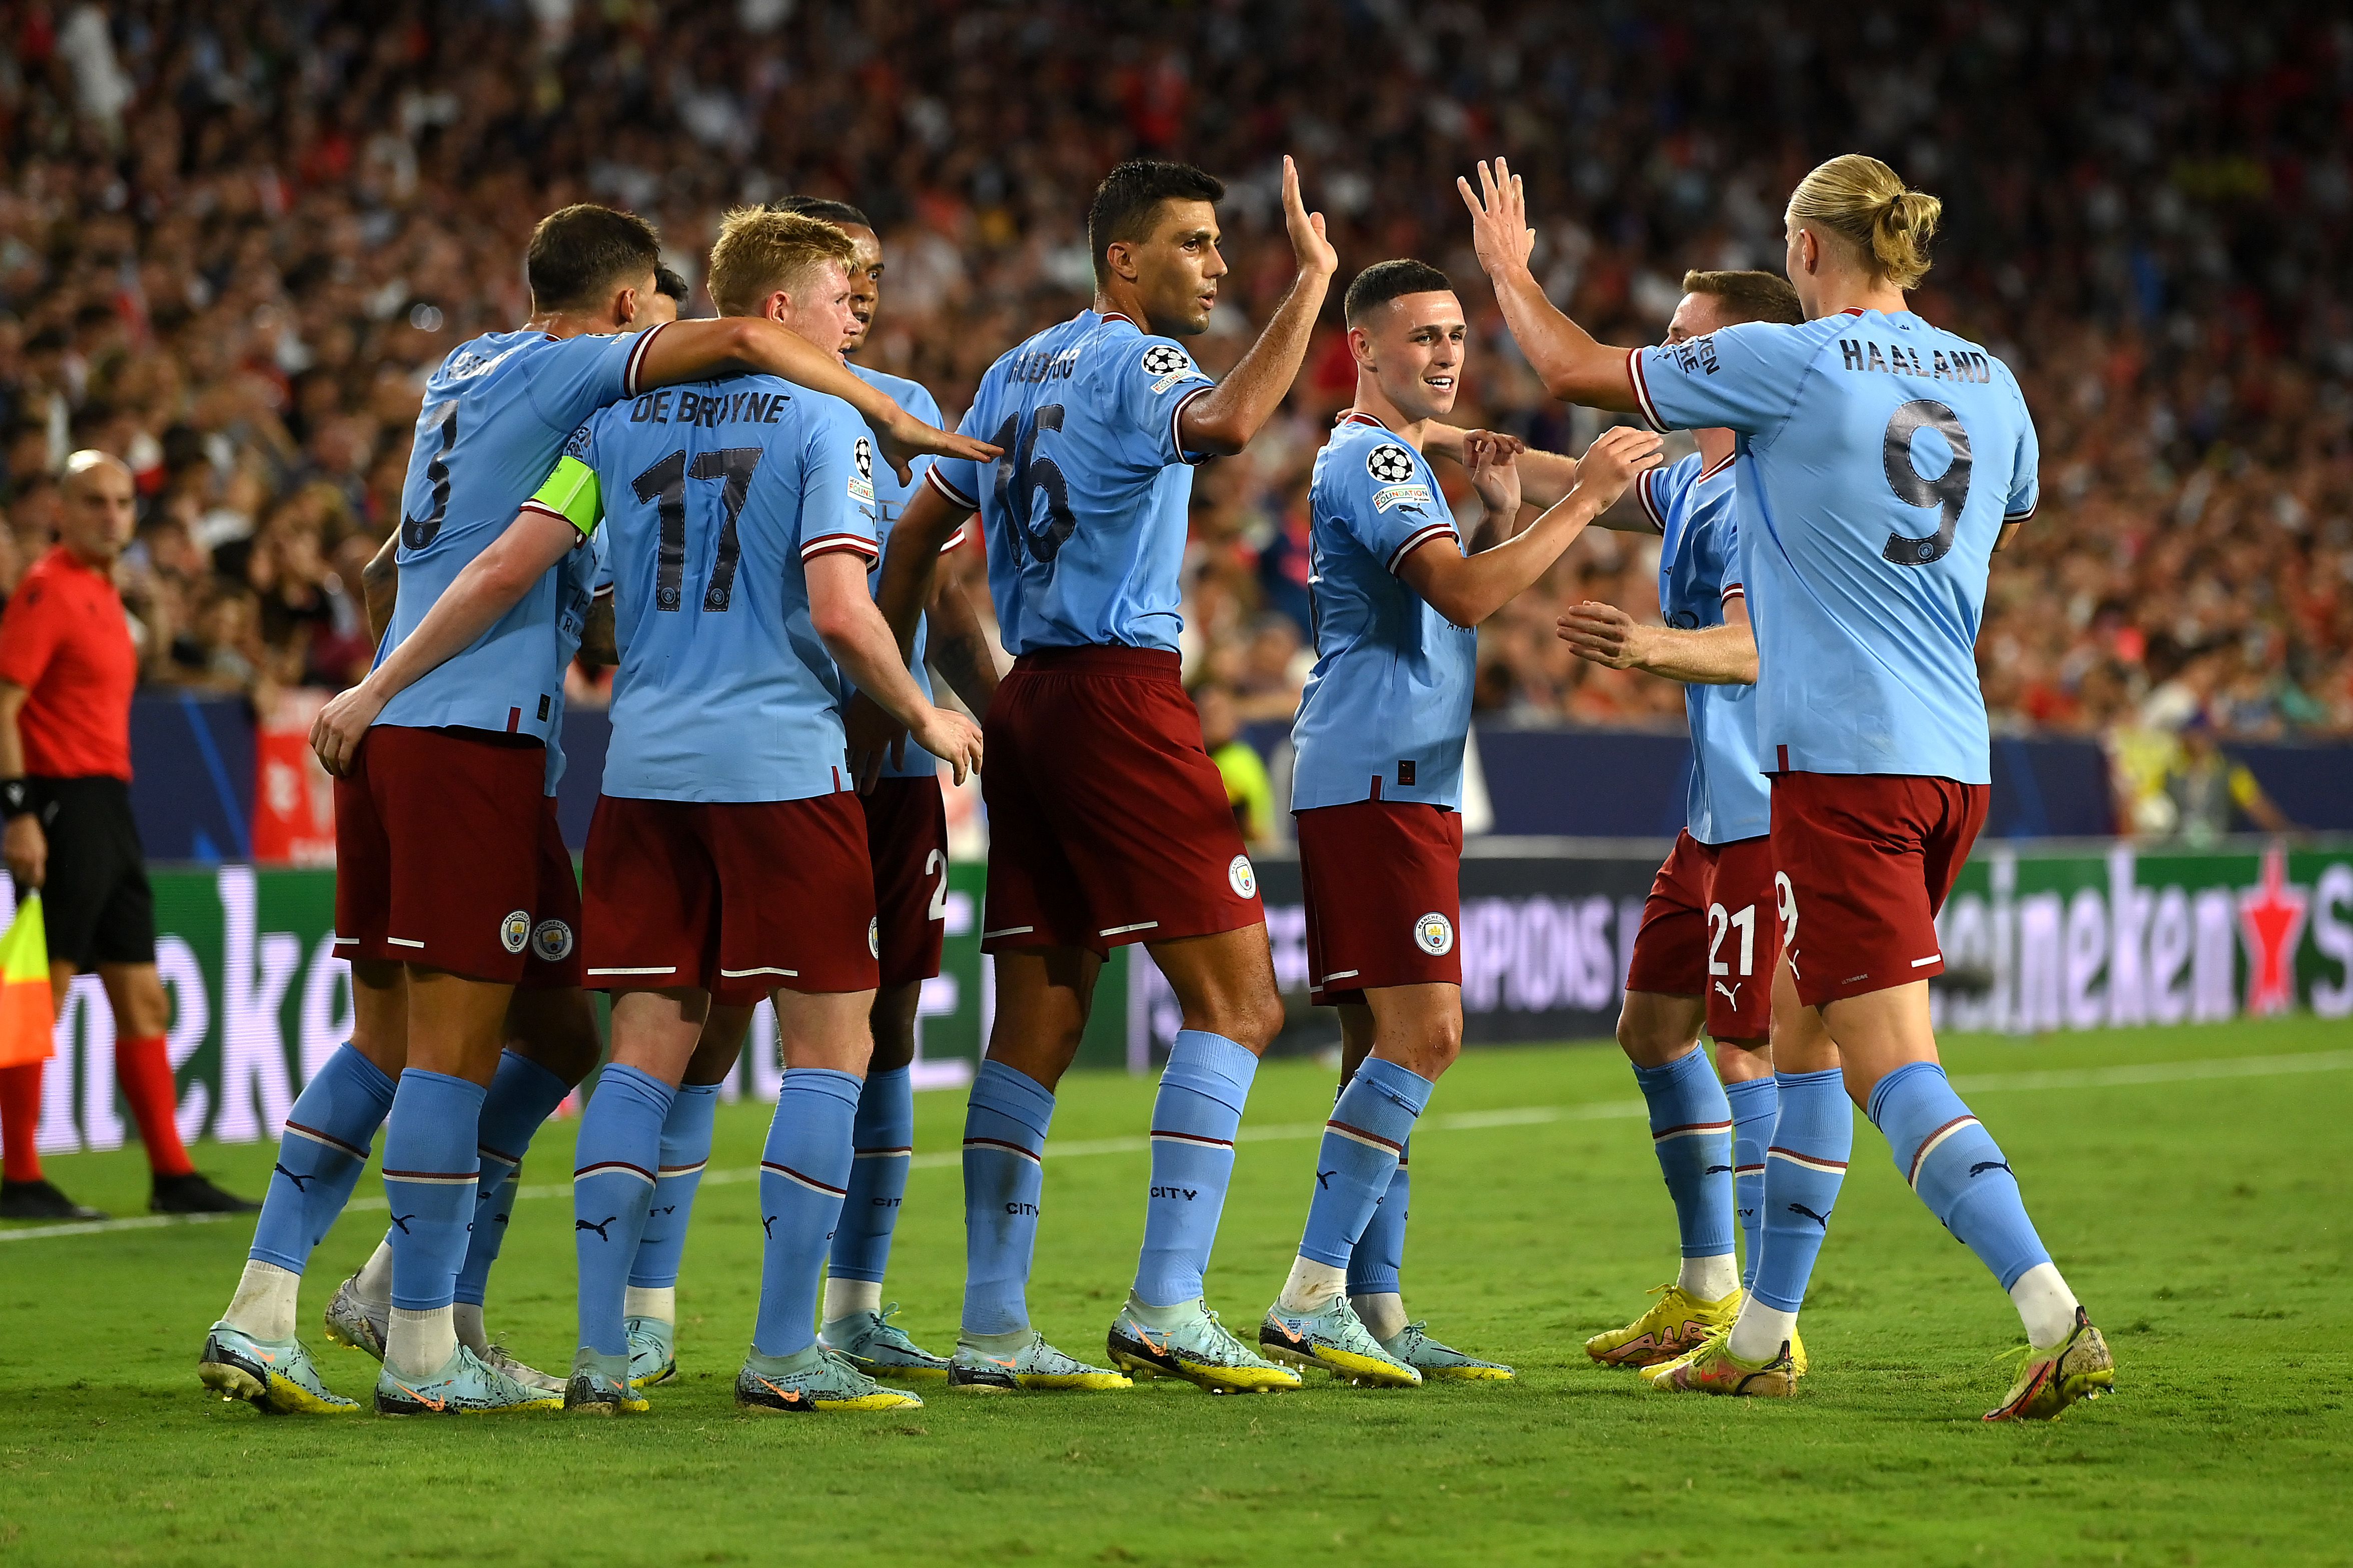 Sevilla 0-4 Manchester City: Erling Haaland hits double as Pep